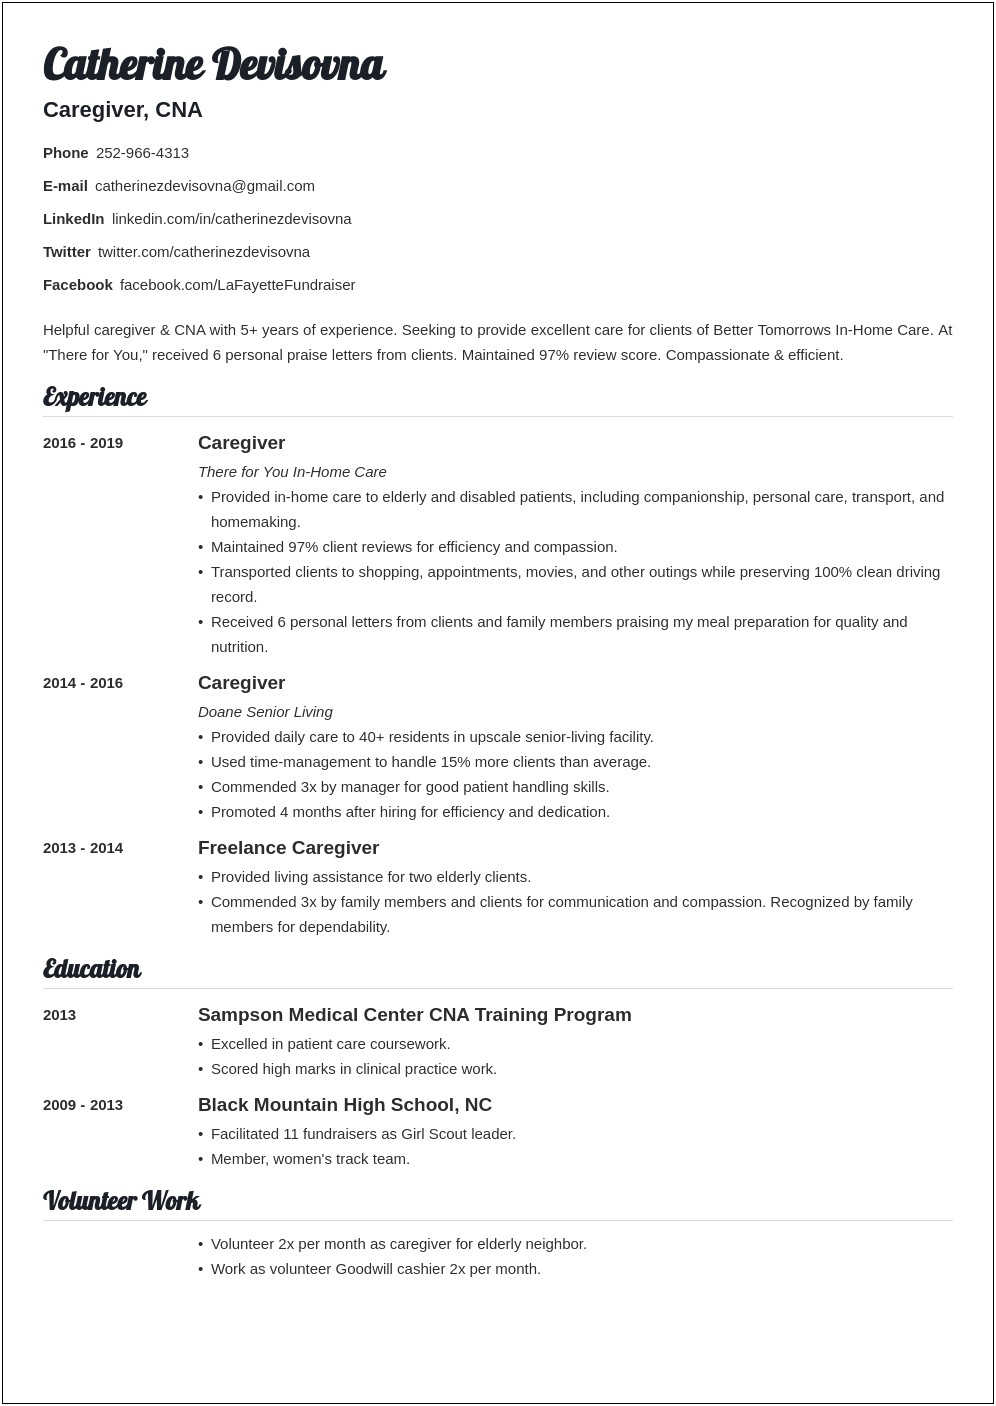 Resume Objective Examples For Entry Level Healthcare